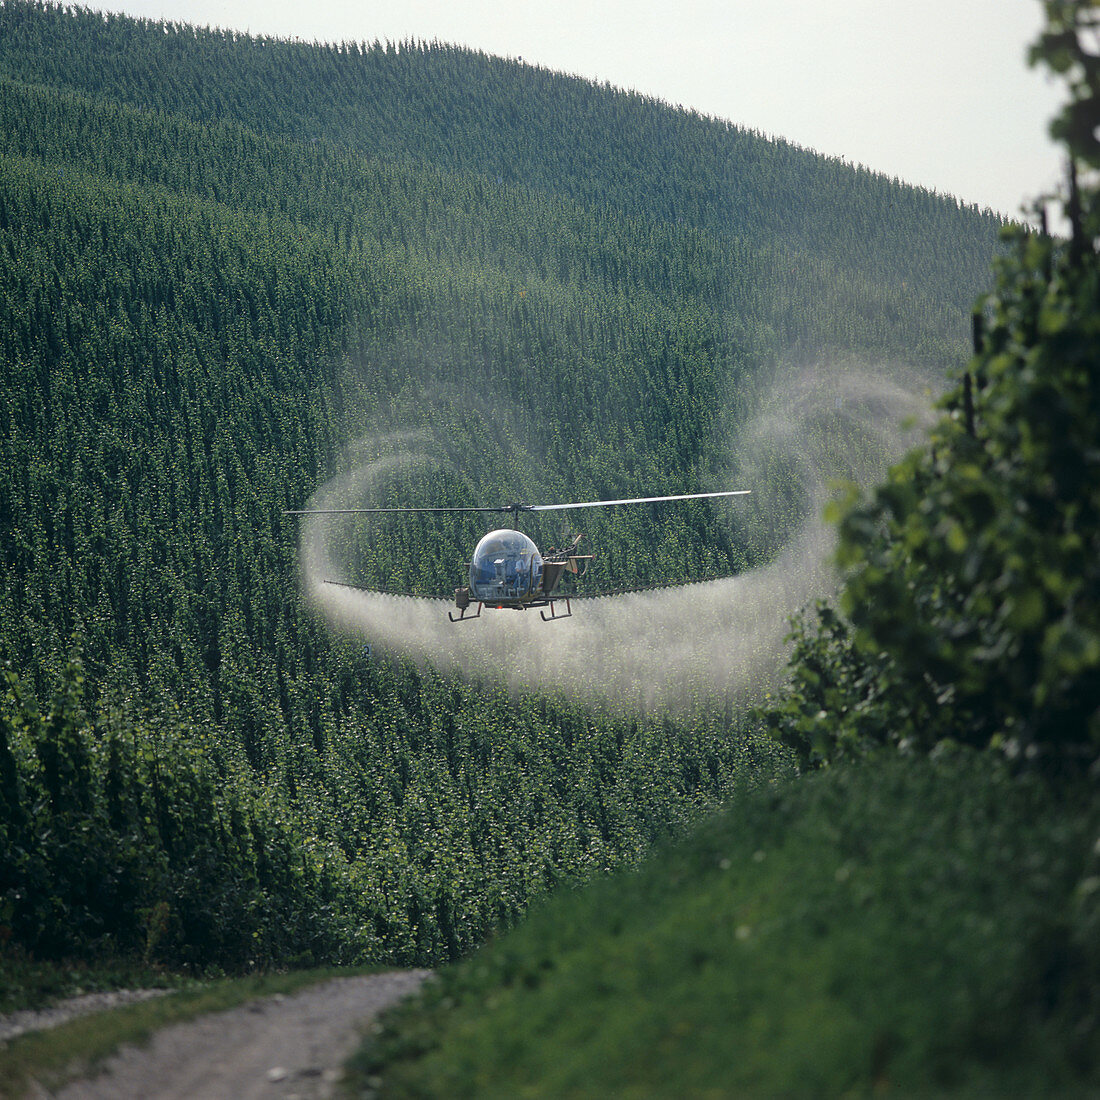 Helicopter Spraying Grapevines